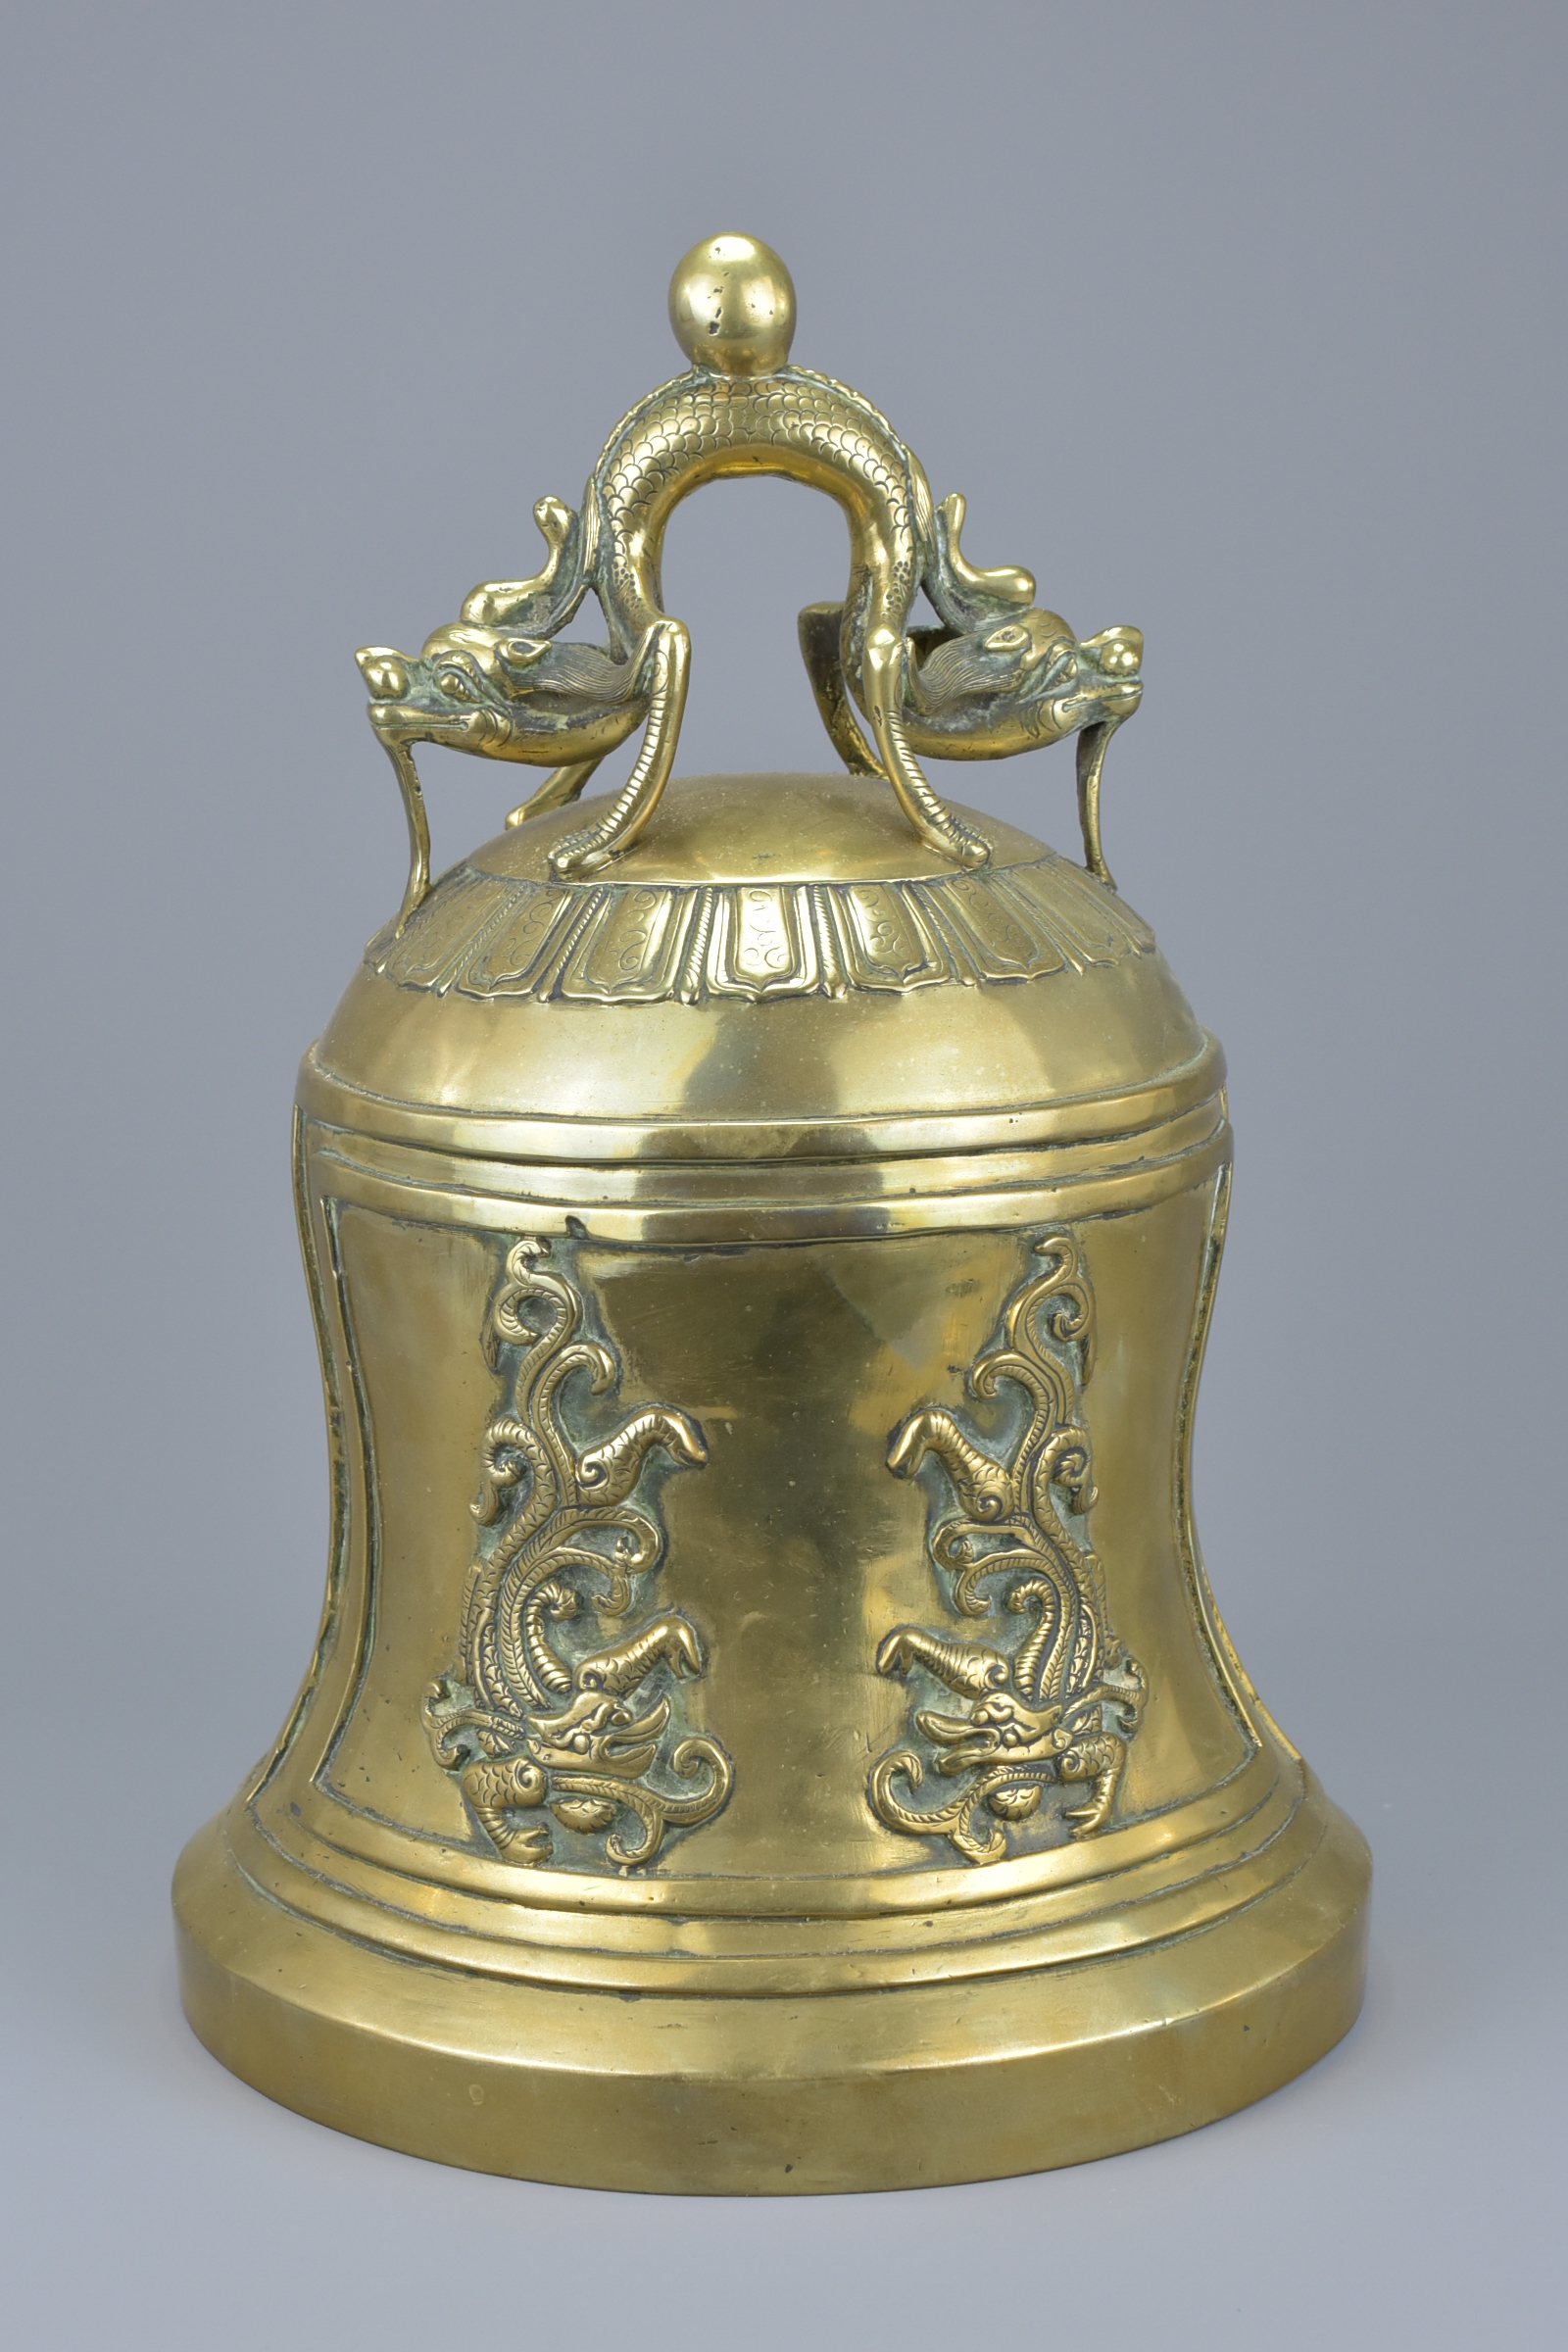 A large Chinese polished bronze bell gong mounted with a dragon handle. 33Cm tall